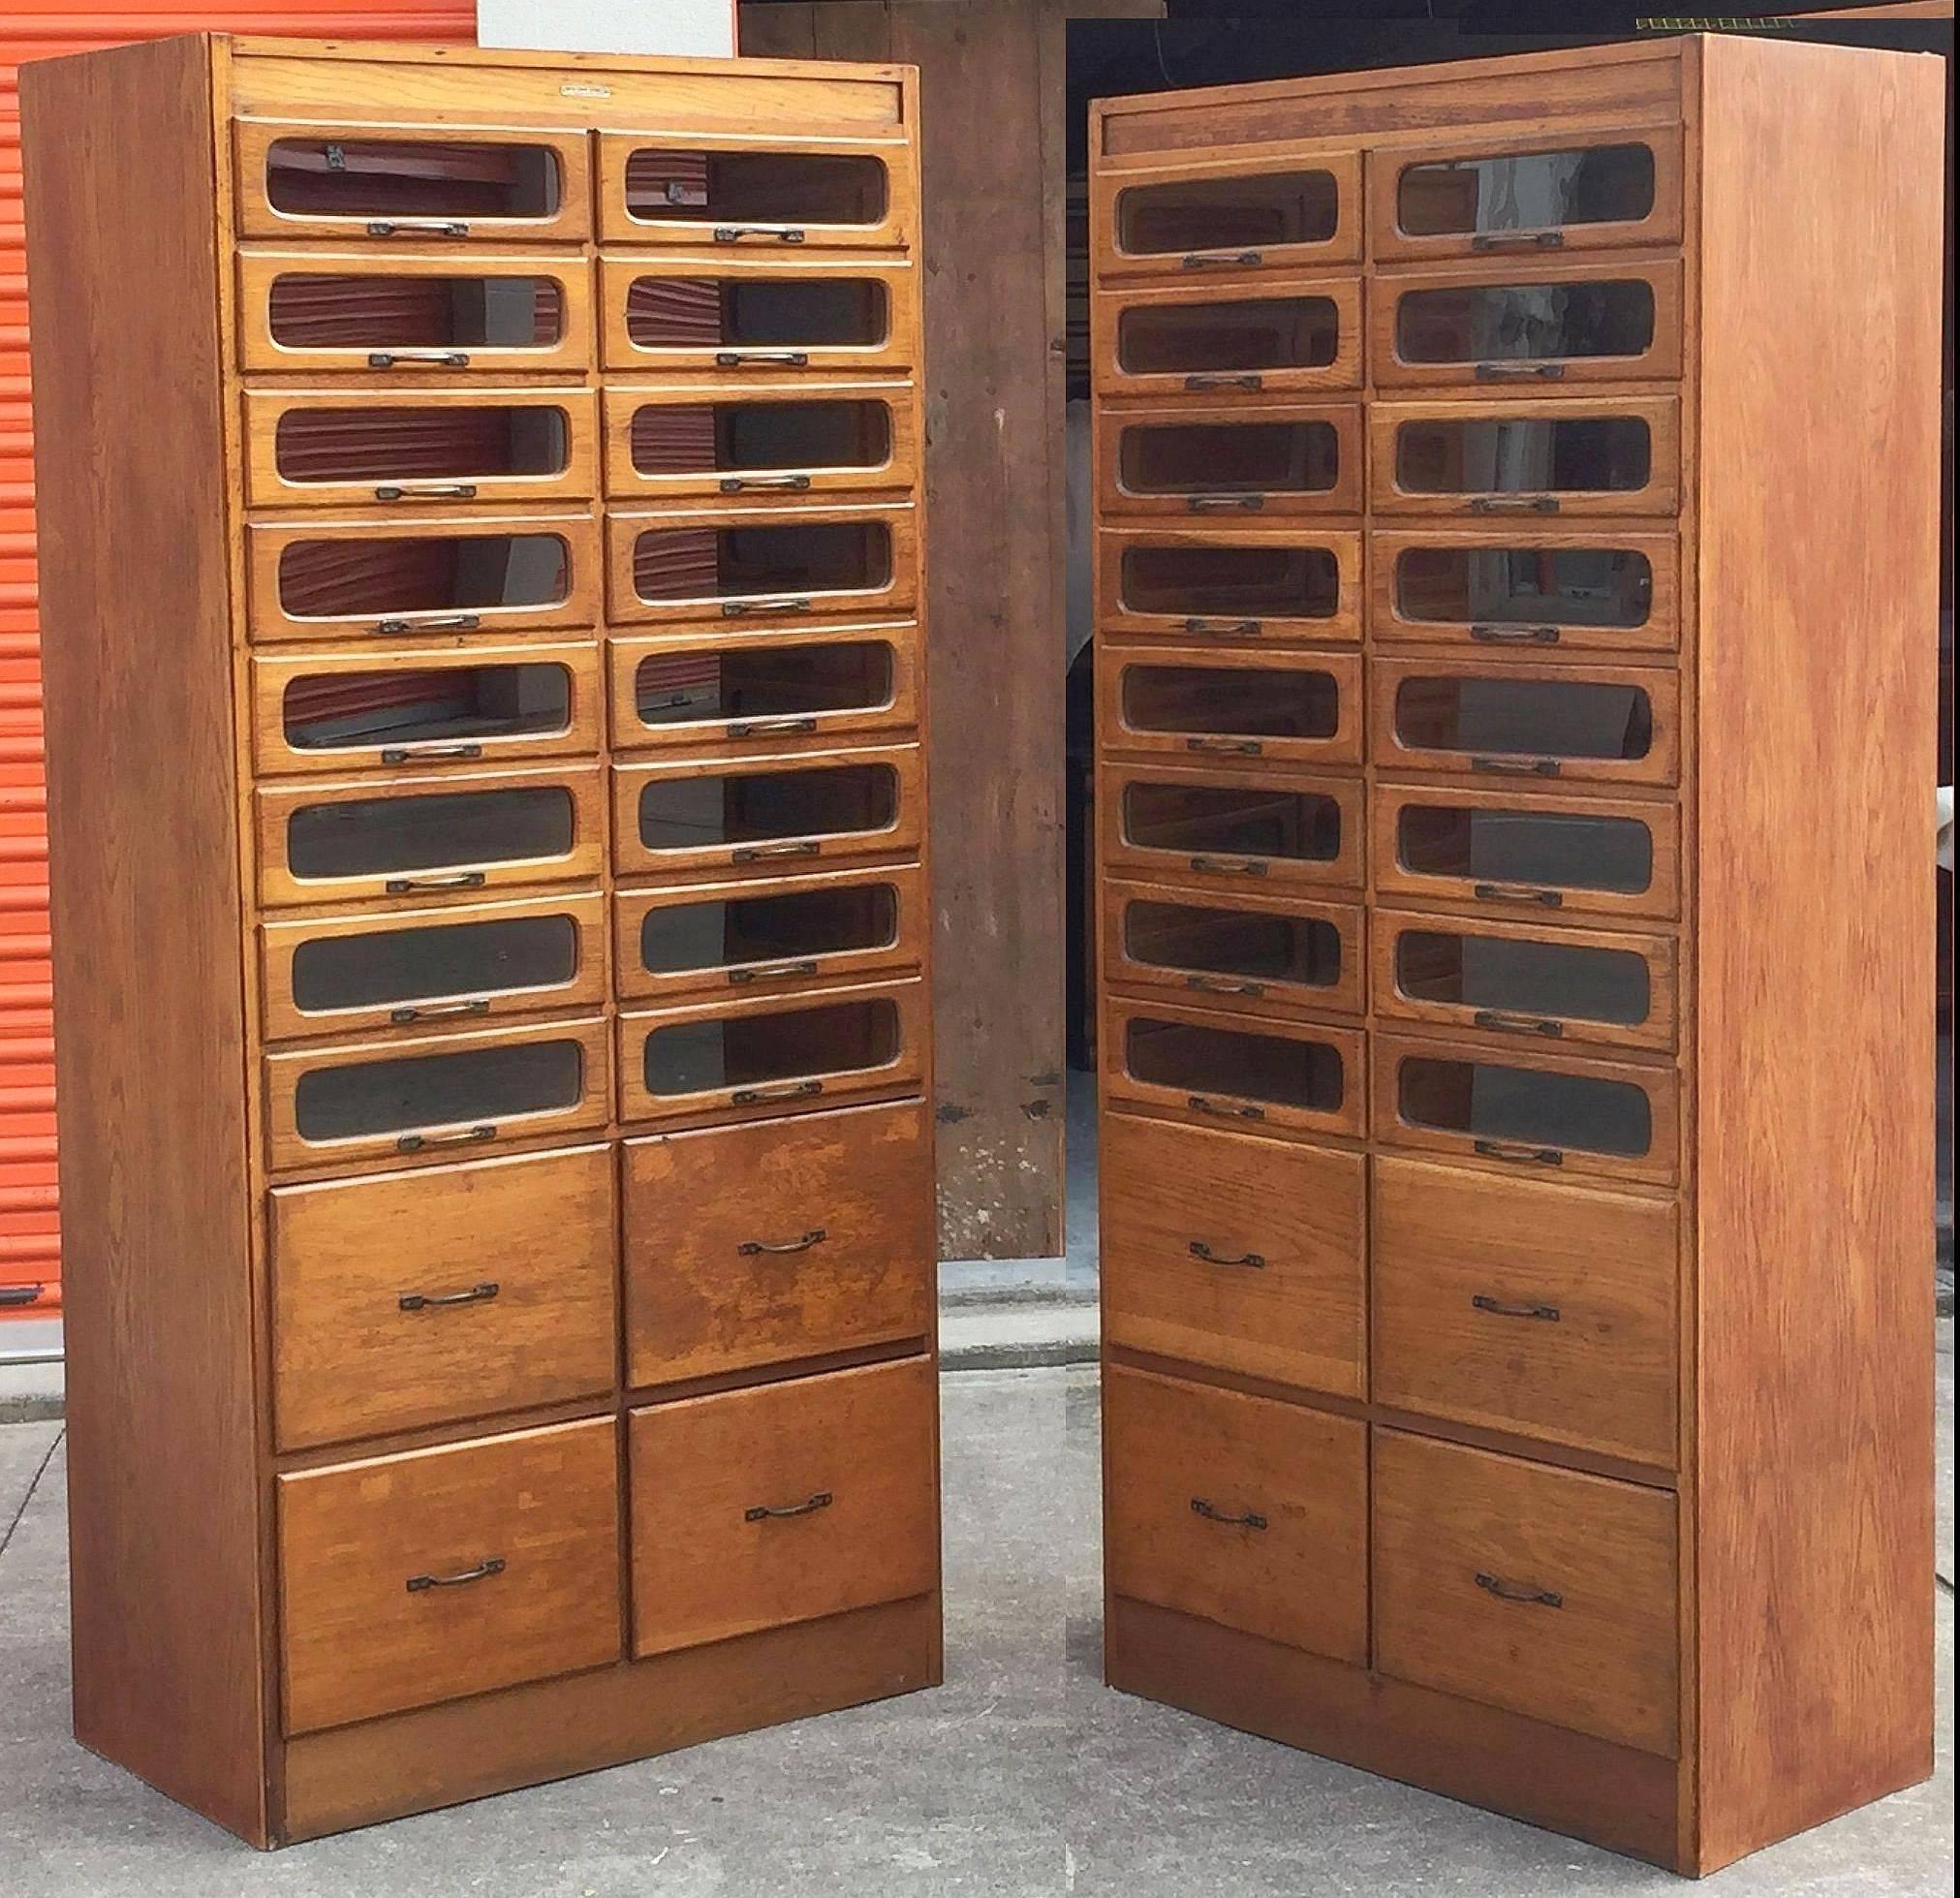 An exceptional pair of large haberdashery or haberdasher's cabinets from England featuring:

16 glass fronted drawers over four blind cupboard drawers .20 drawers total on each cabinet.

The fitted drawers with steel hardware.

Label at top